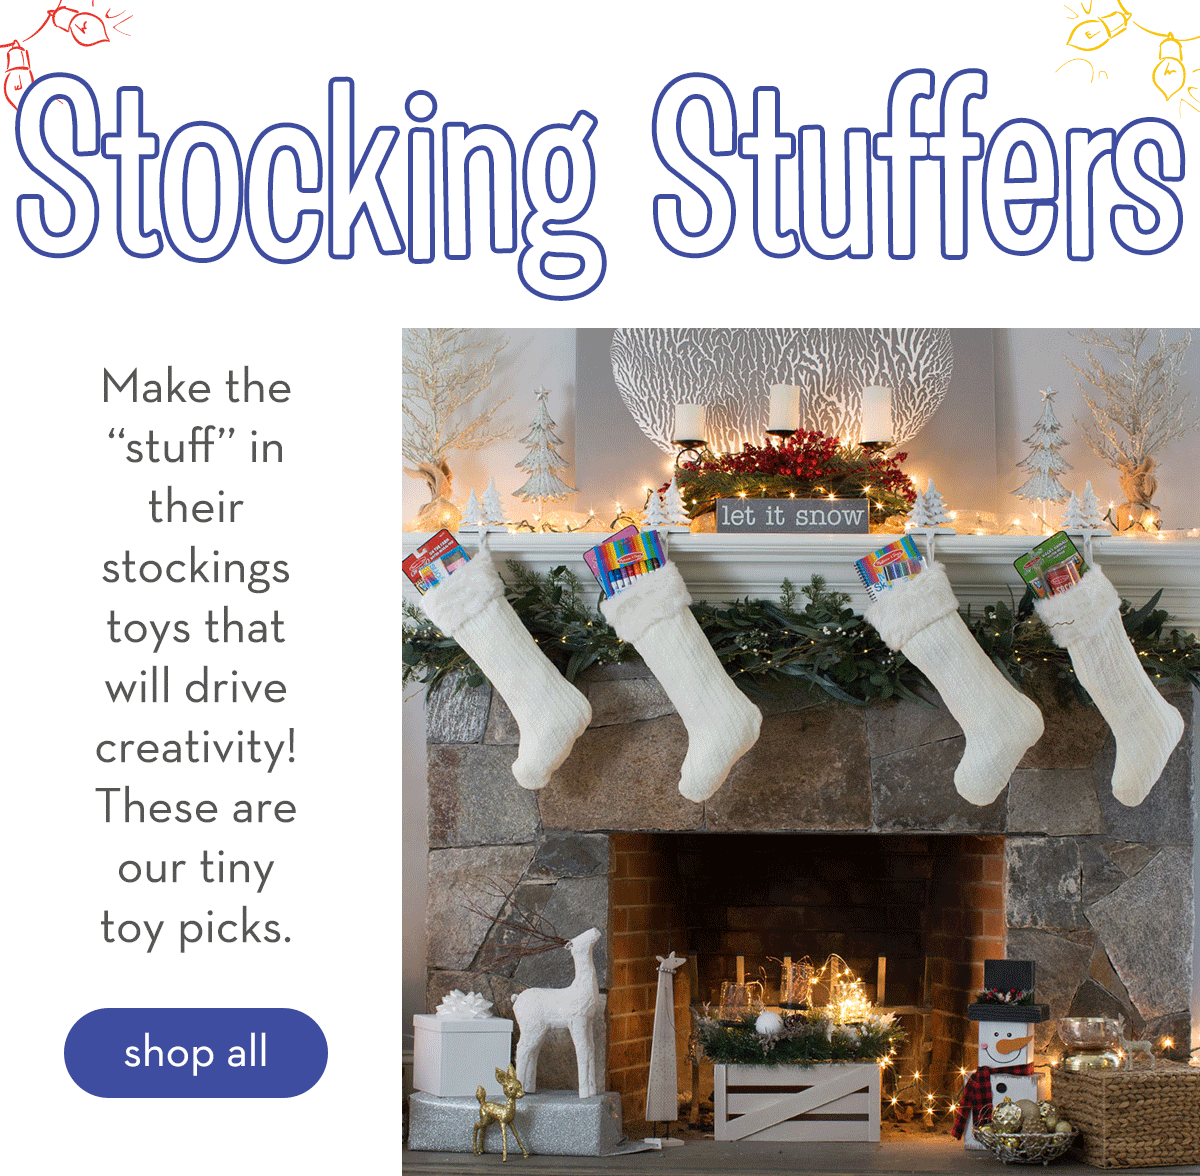 Stocking Stuffers - Make the stuff in their stockings things that will drive creativity! These are our tiny toy picks. Shop all.